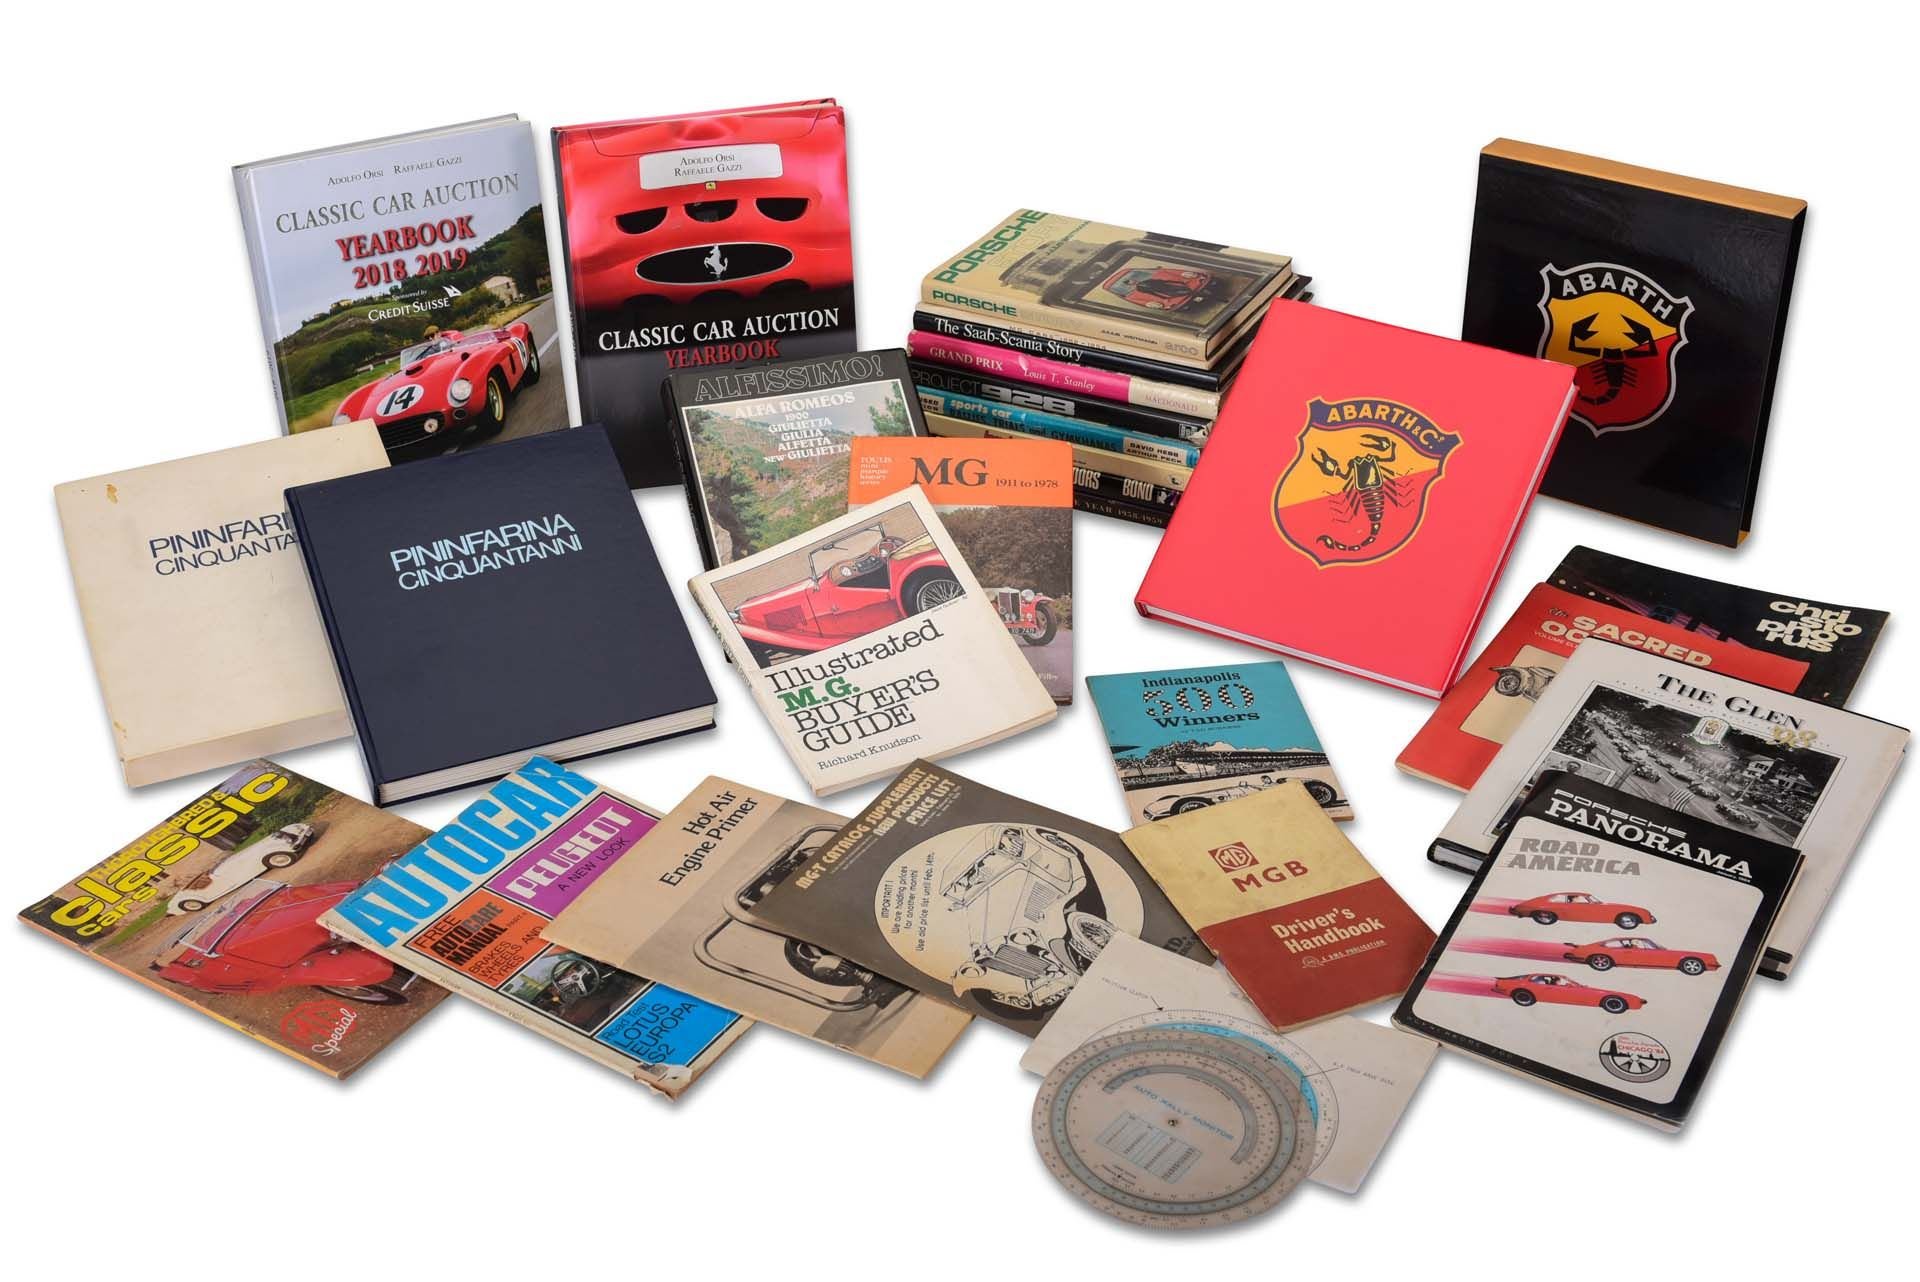 For Sale Assorted Automobile Books including Abarth and Classic Car Auction Yearbooks